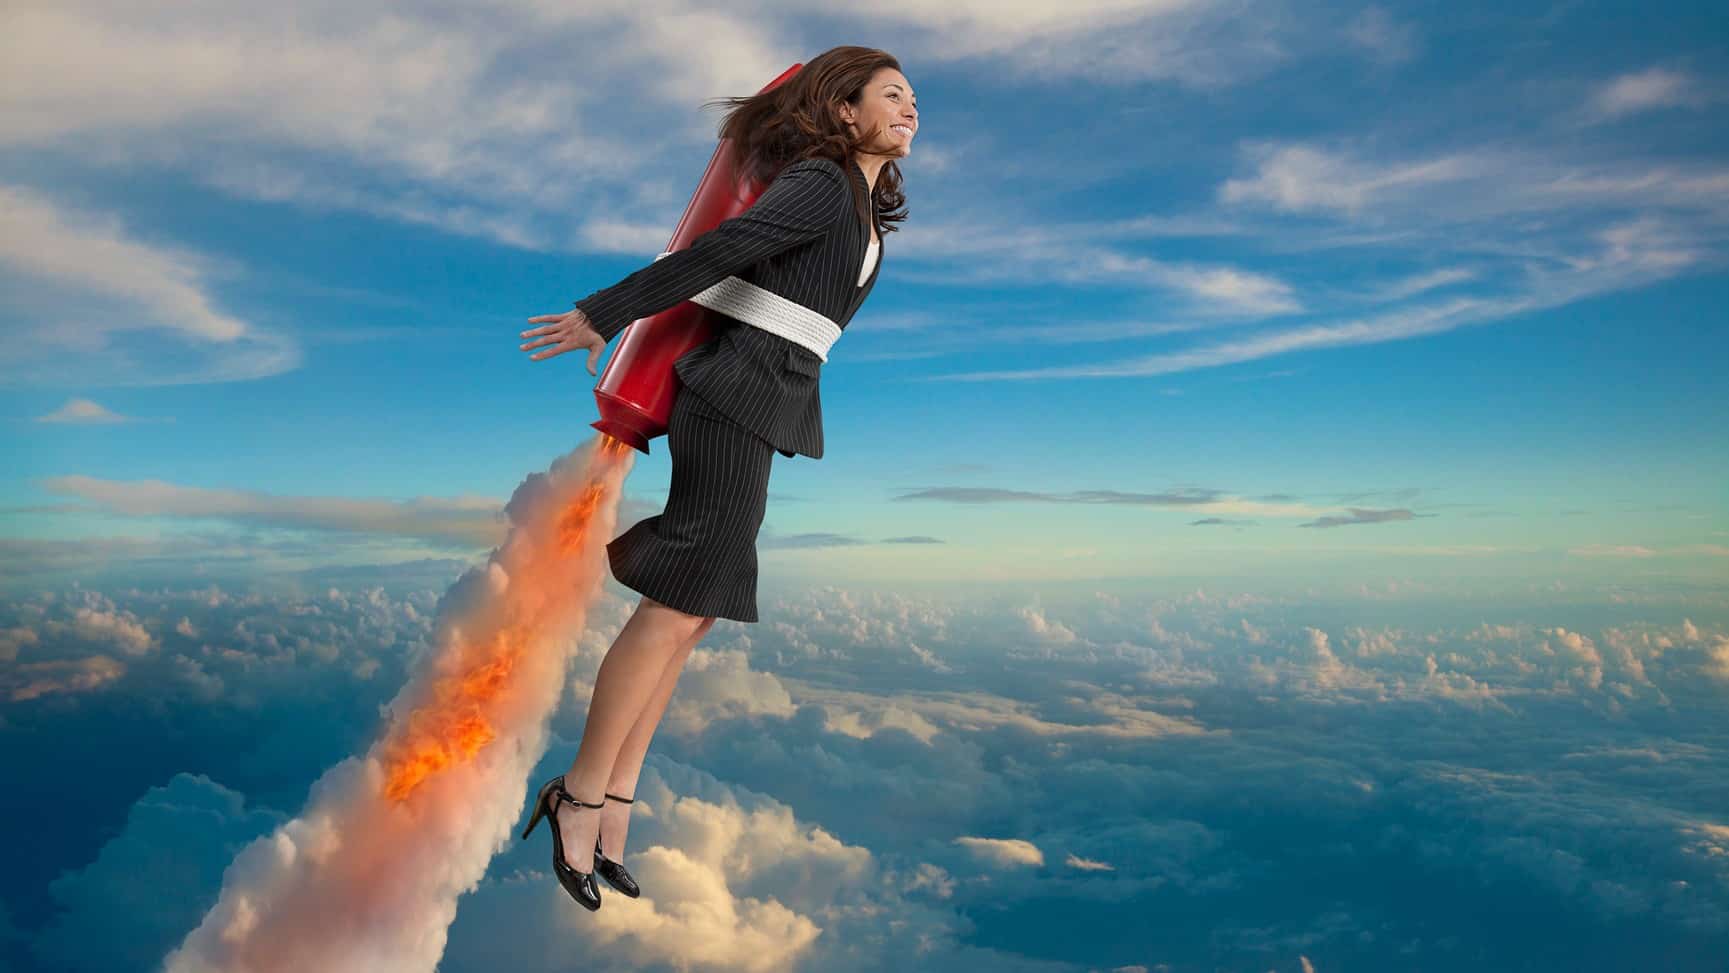 Woman attached to rocket flies into air